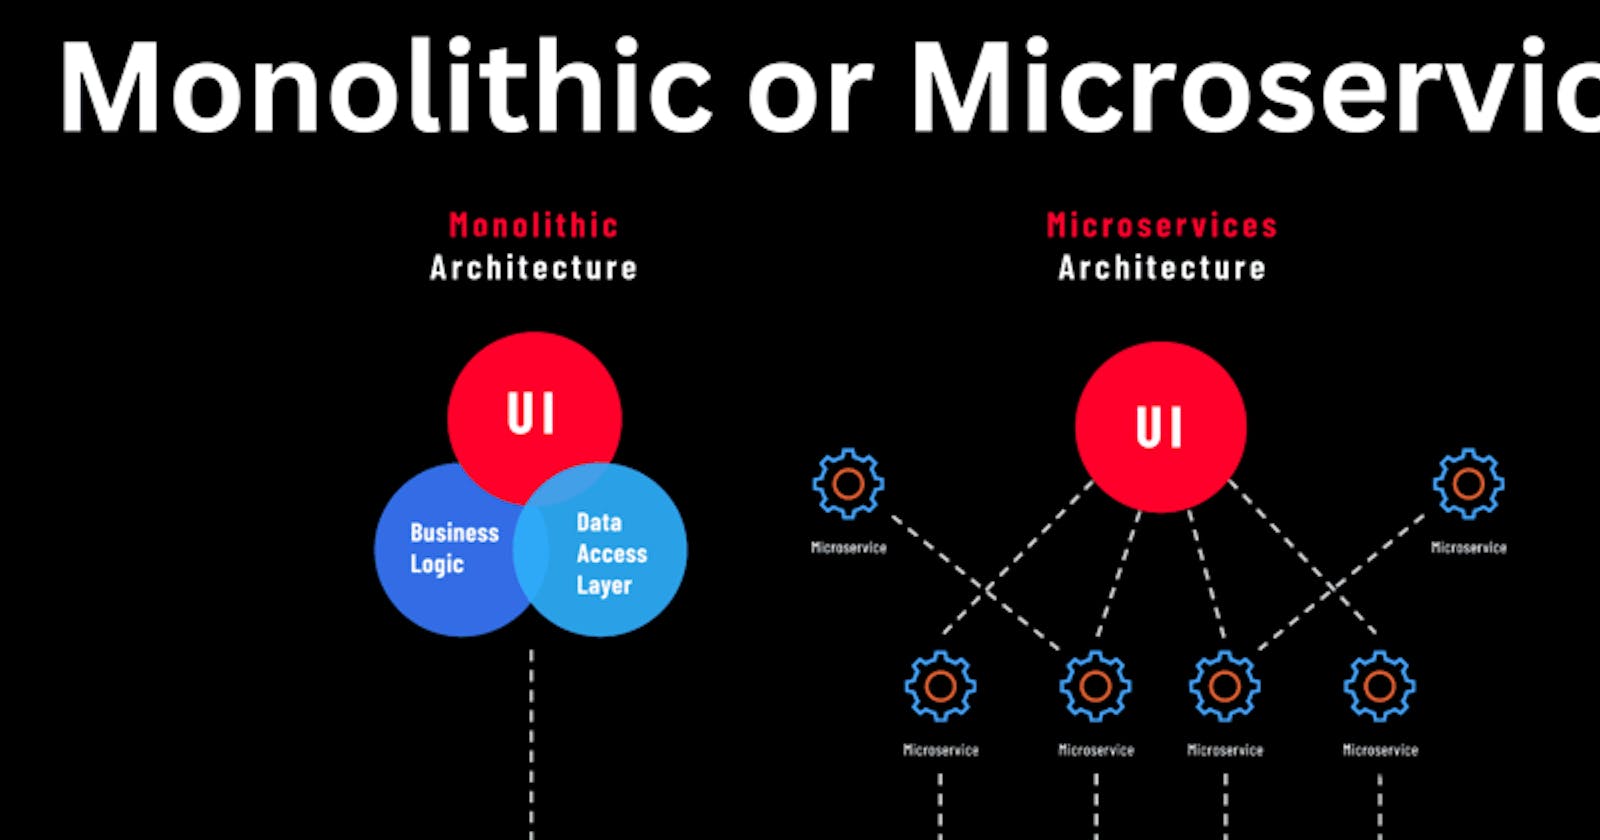 Monolithic or Microservices?